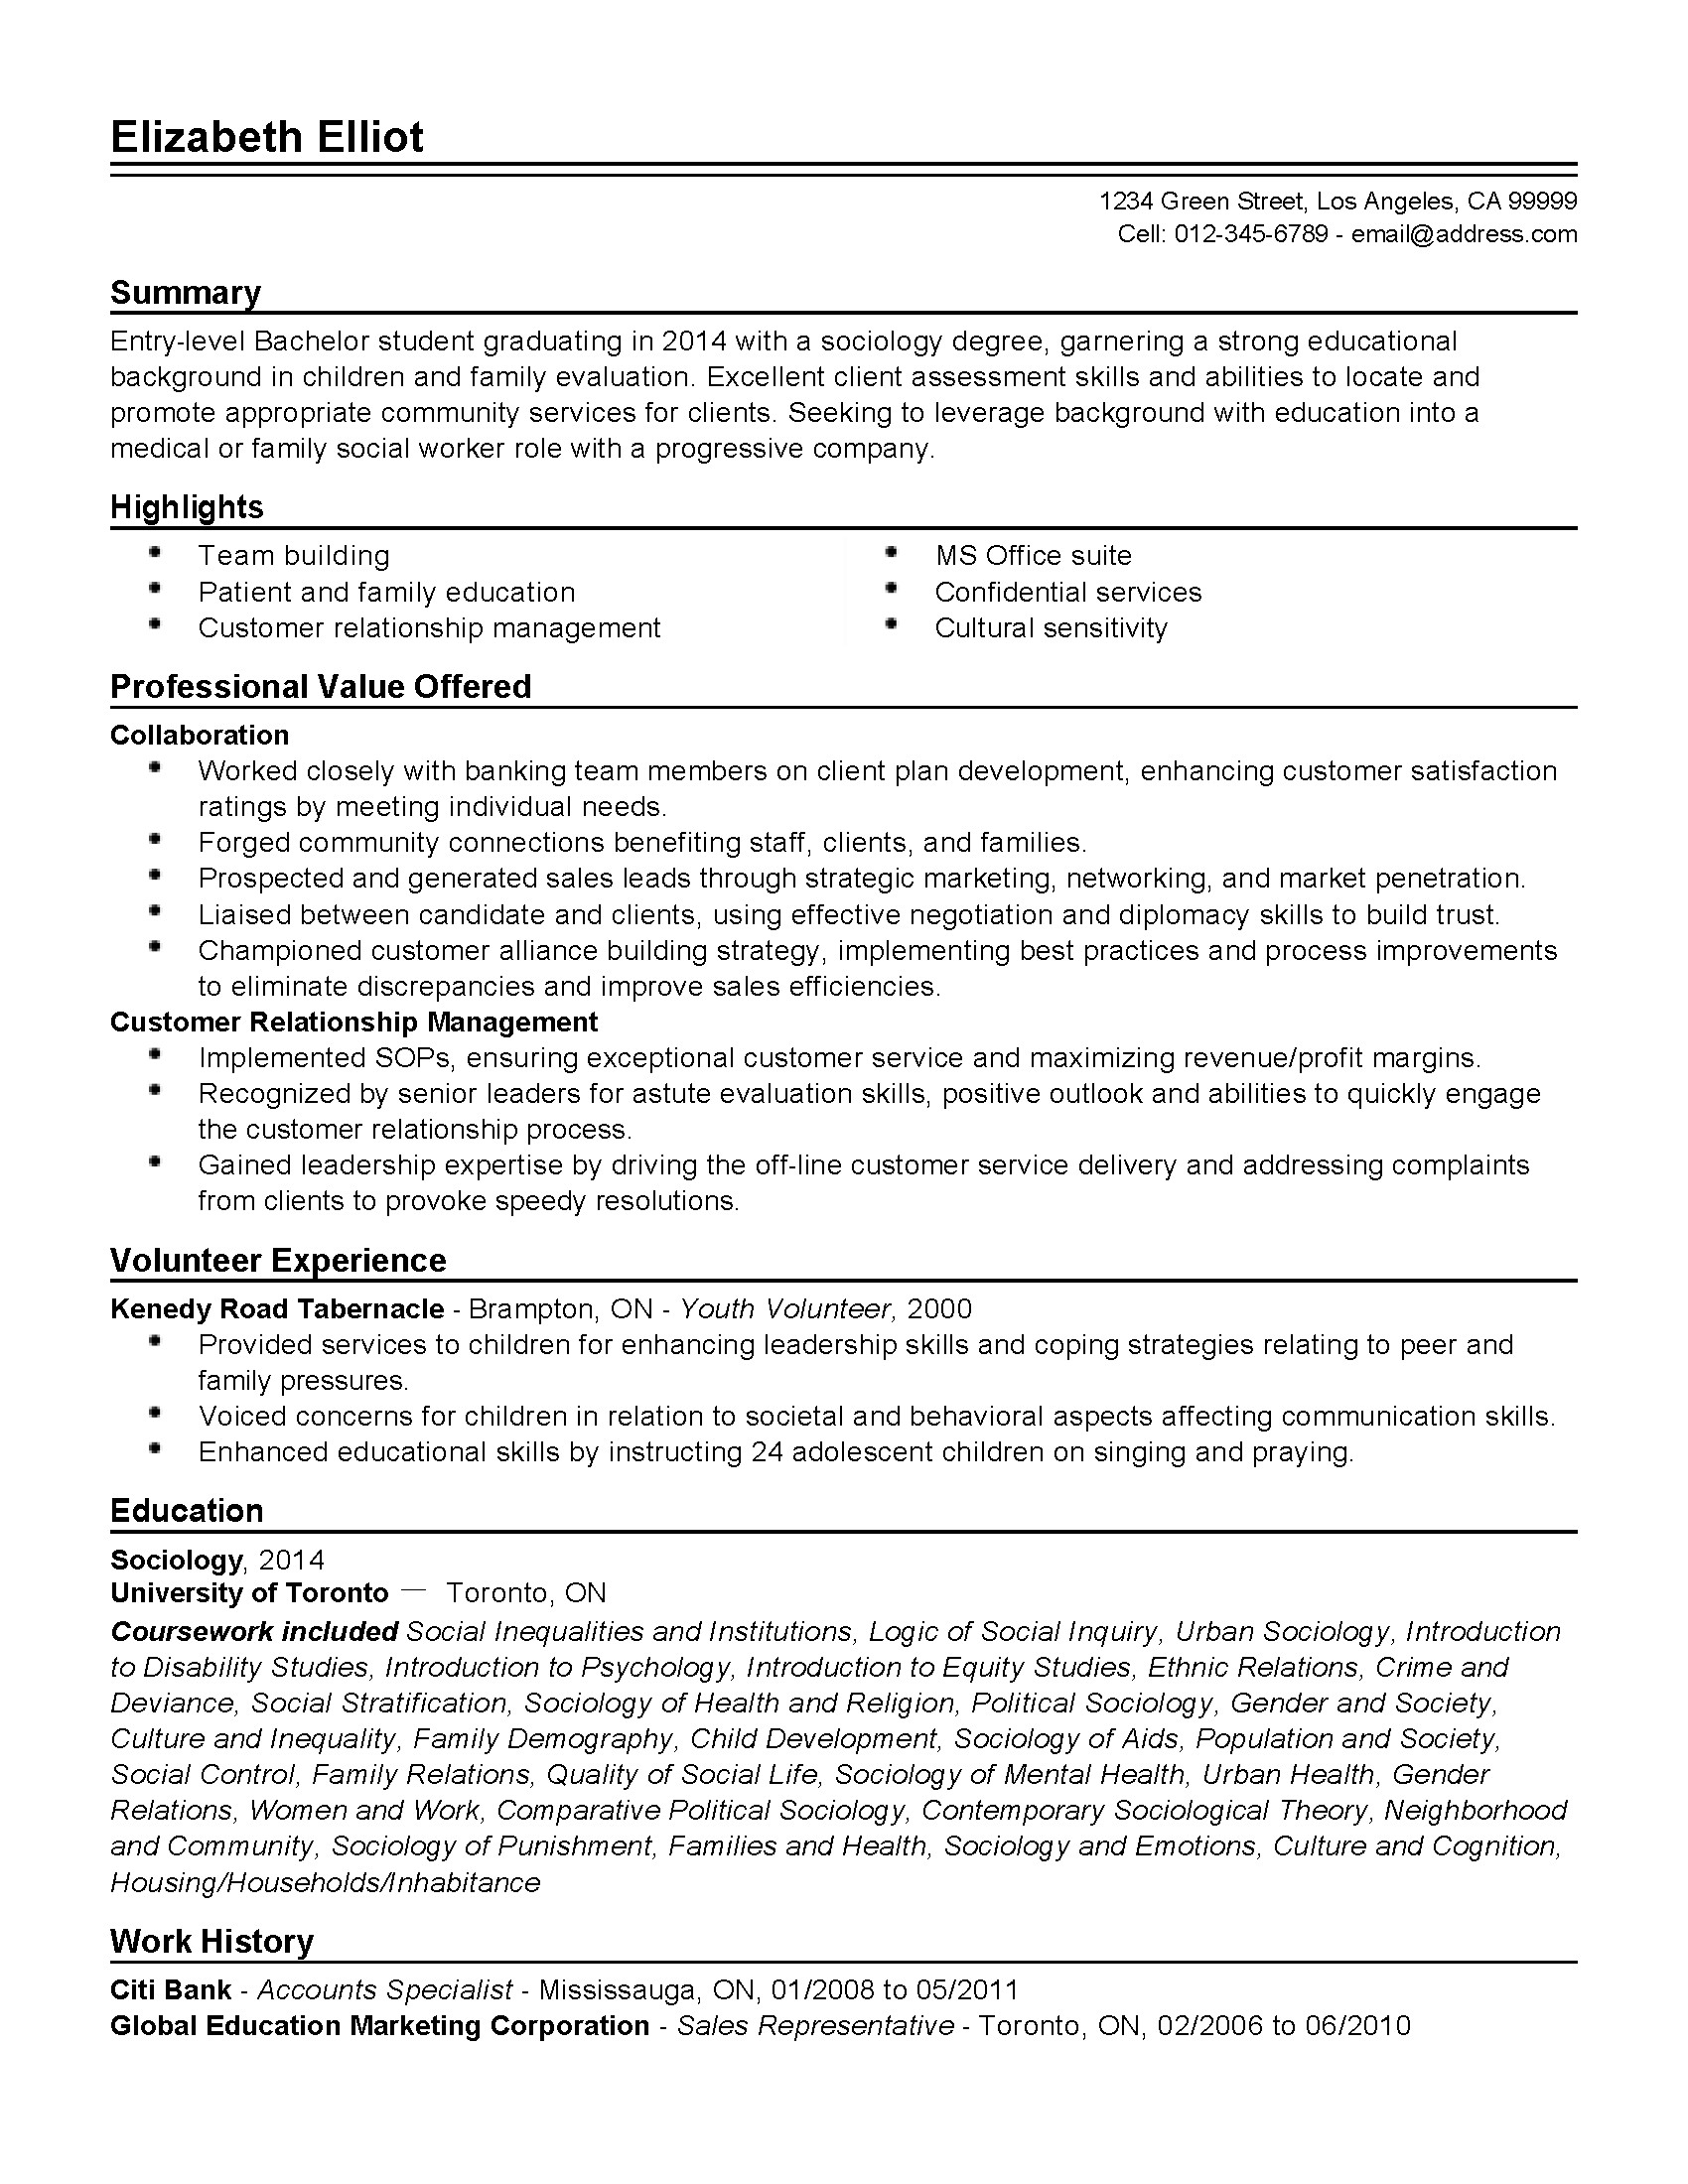 Social Work Resume Template Professional Entry Level social Worker Templates to